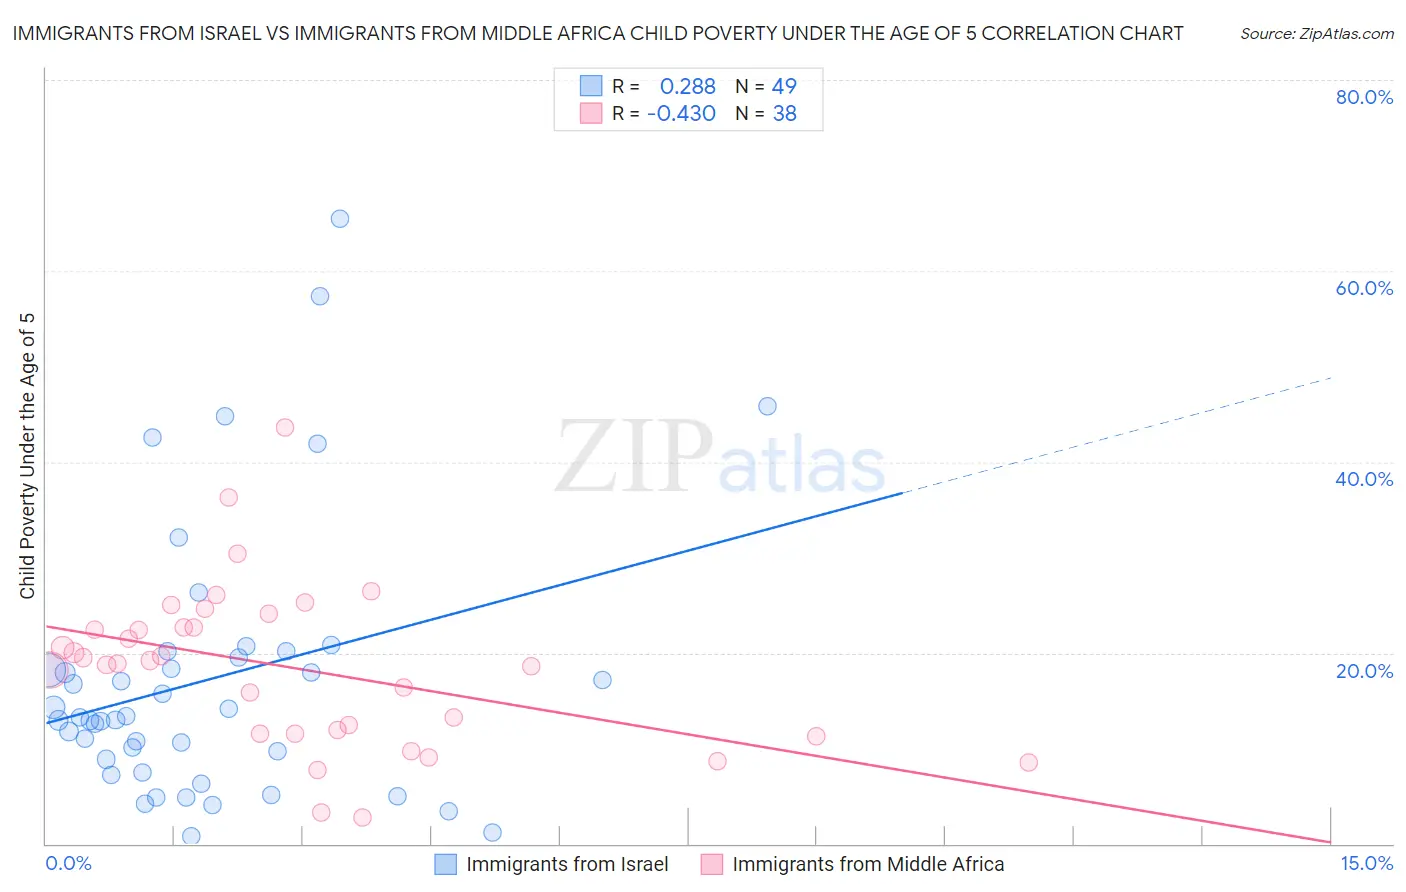 Immigrants from Israel vs Immigrants from Middle Africa Child Poverty Under the Age of 5